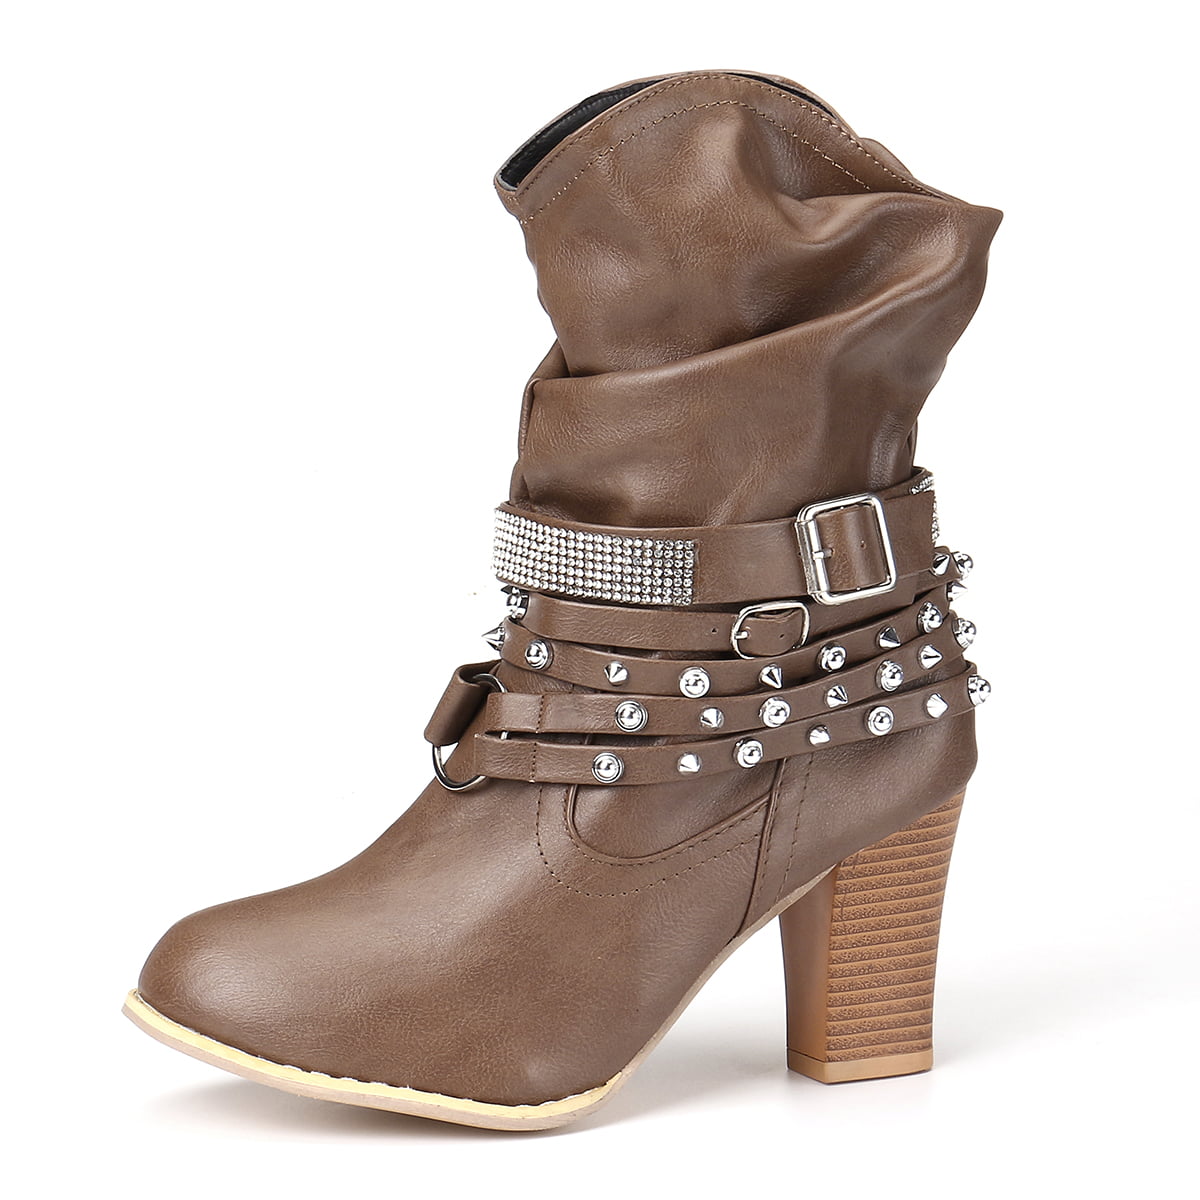 Womens Block High Heel Ankle Boots Buckle Belt Rhinestone Leather Shoes Booties